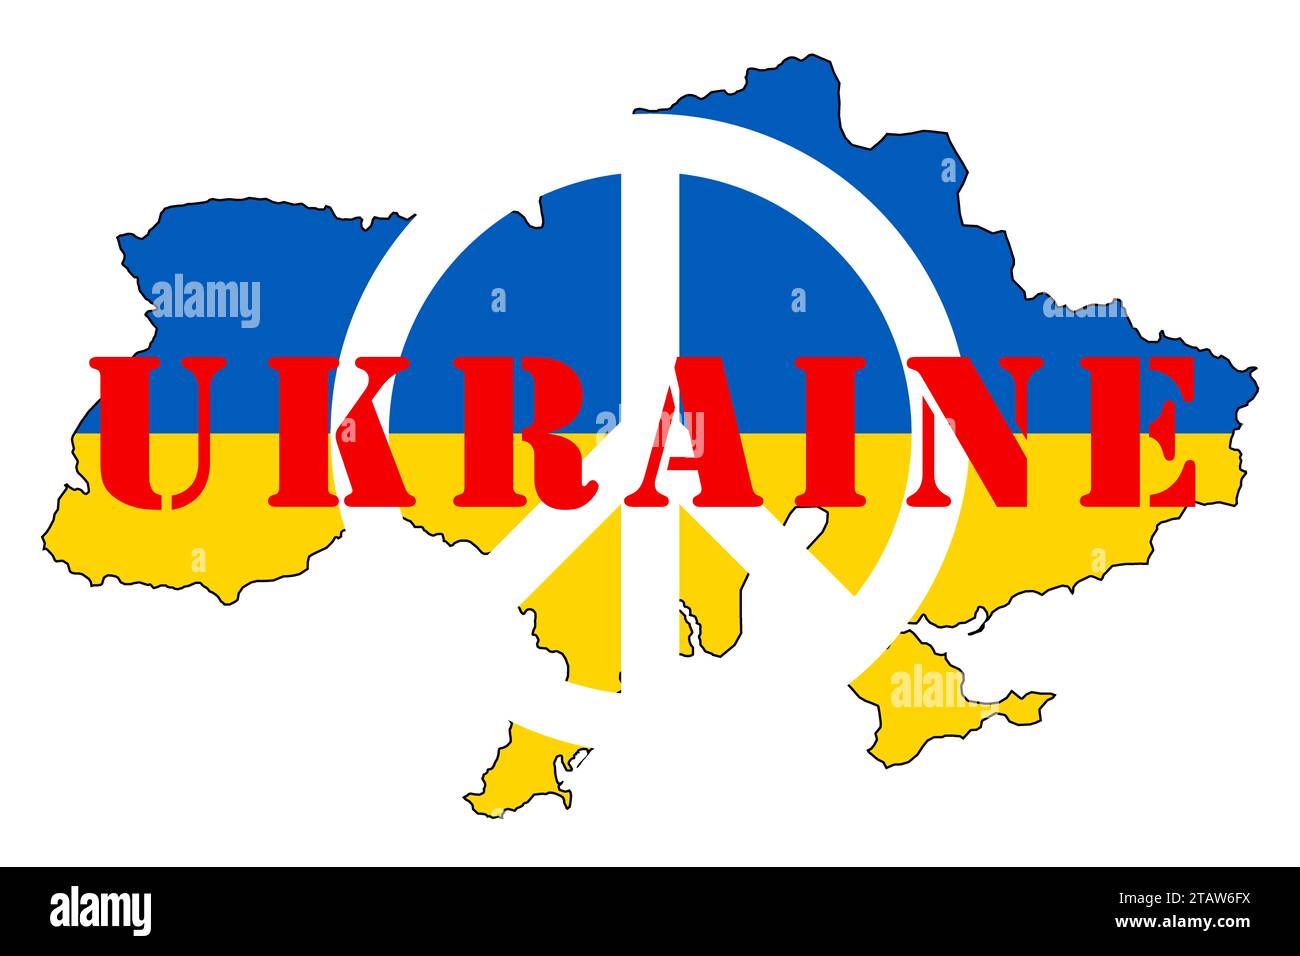 Ukraine with the shape, colors and name of the nation, illustrated graphics for the logo with the peace symbol. Stock Photo